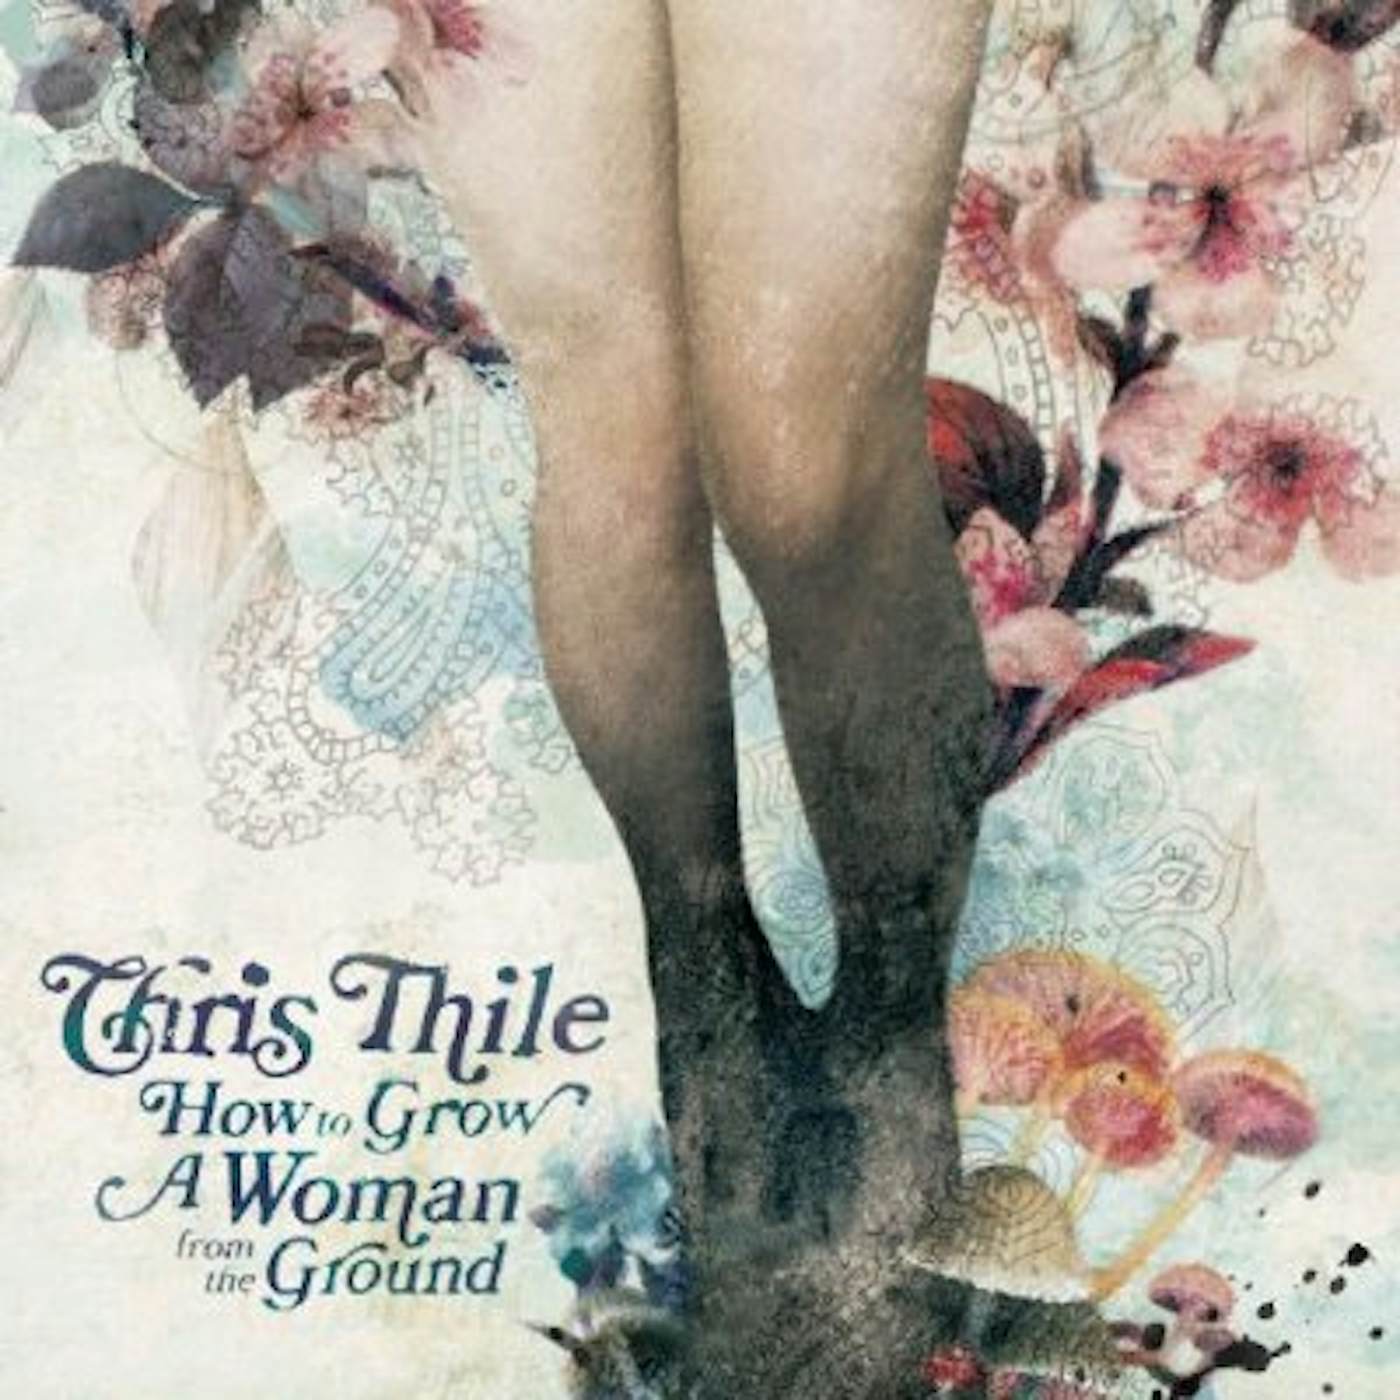 Chris Thile HOW TO GROW A WOMAN FROM THE GROUND CD